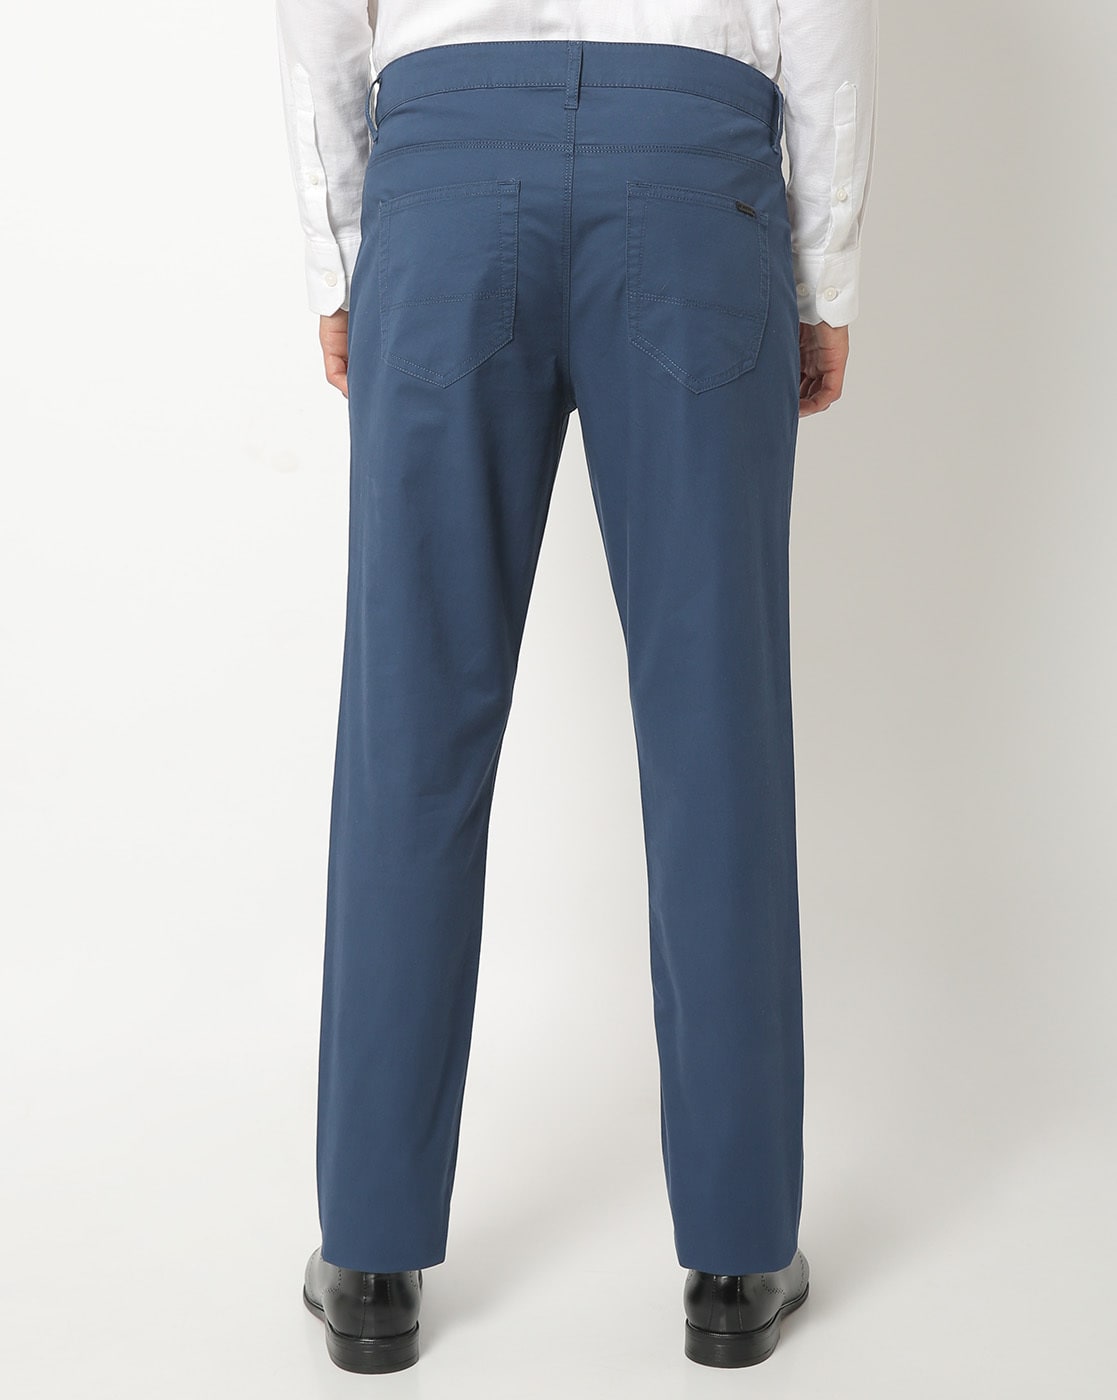 Buy UNITED COLORS OF BENETTON Blue Solid Polyester Cotton Slim Fit Mens  Trousers  Shoppers Stop